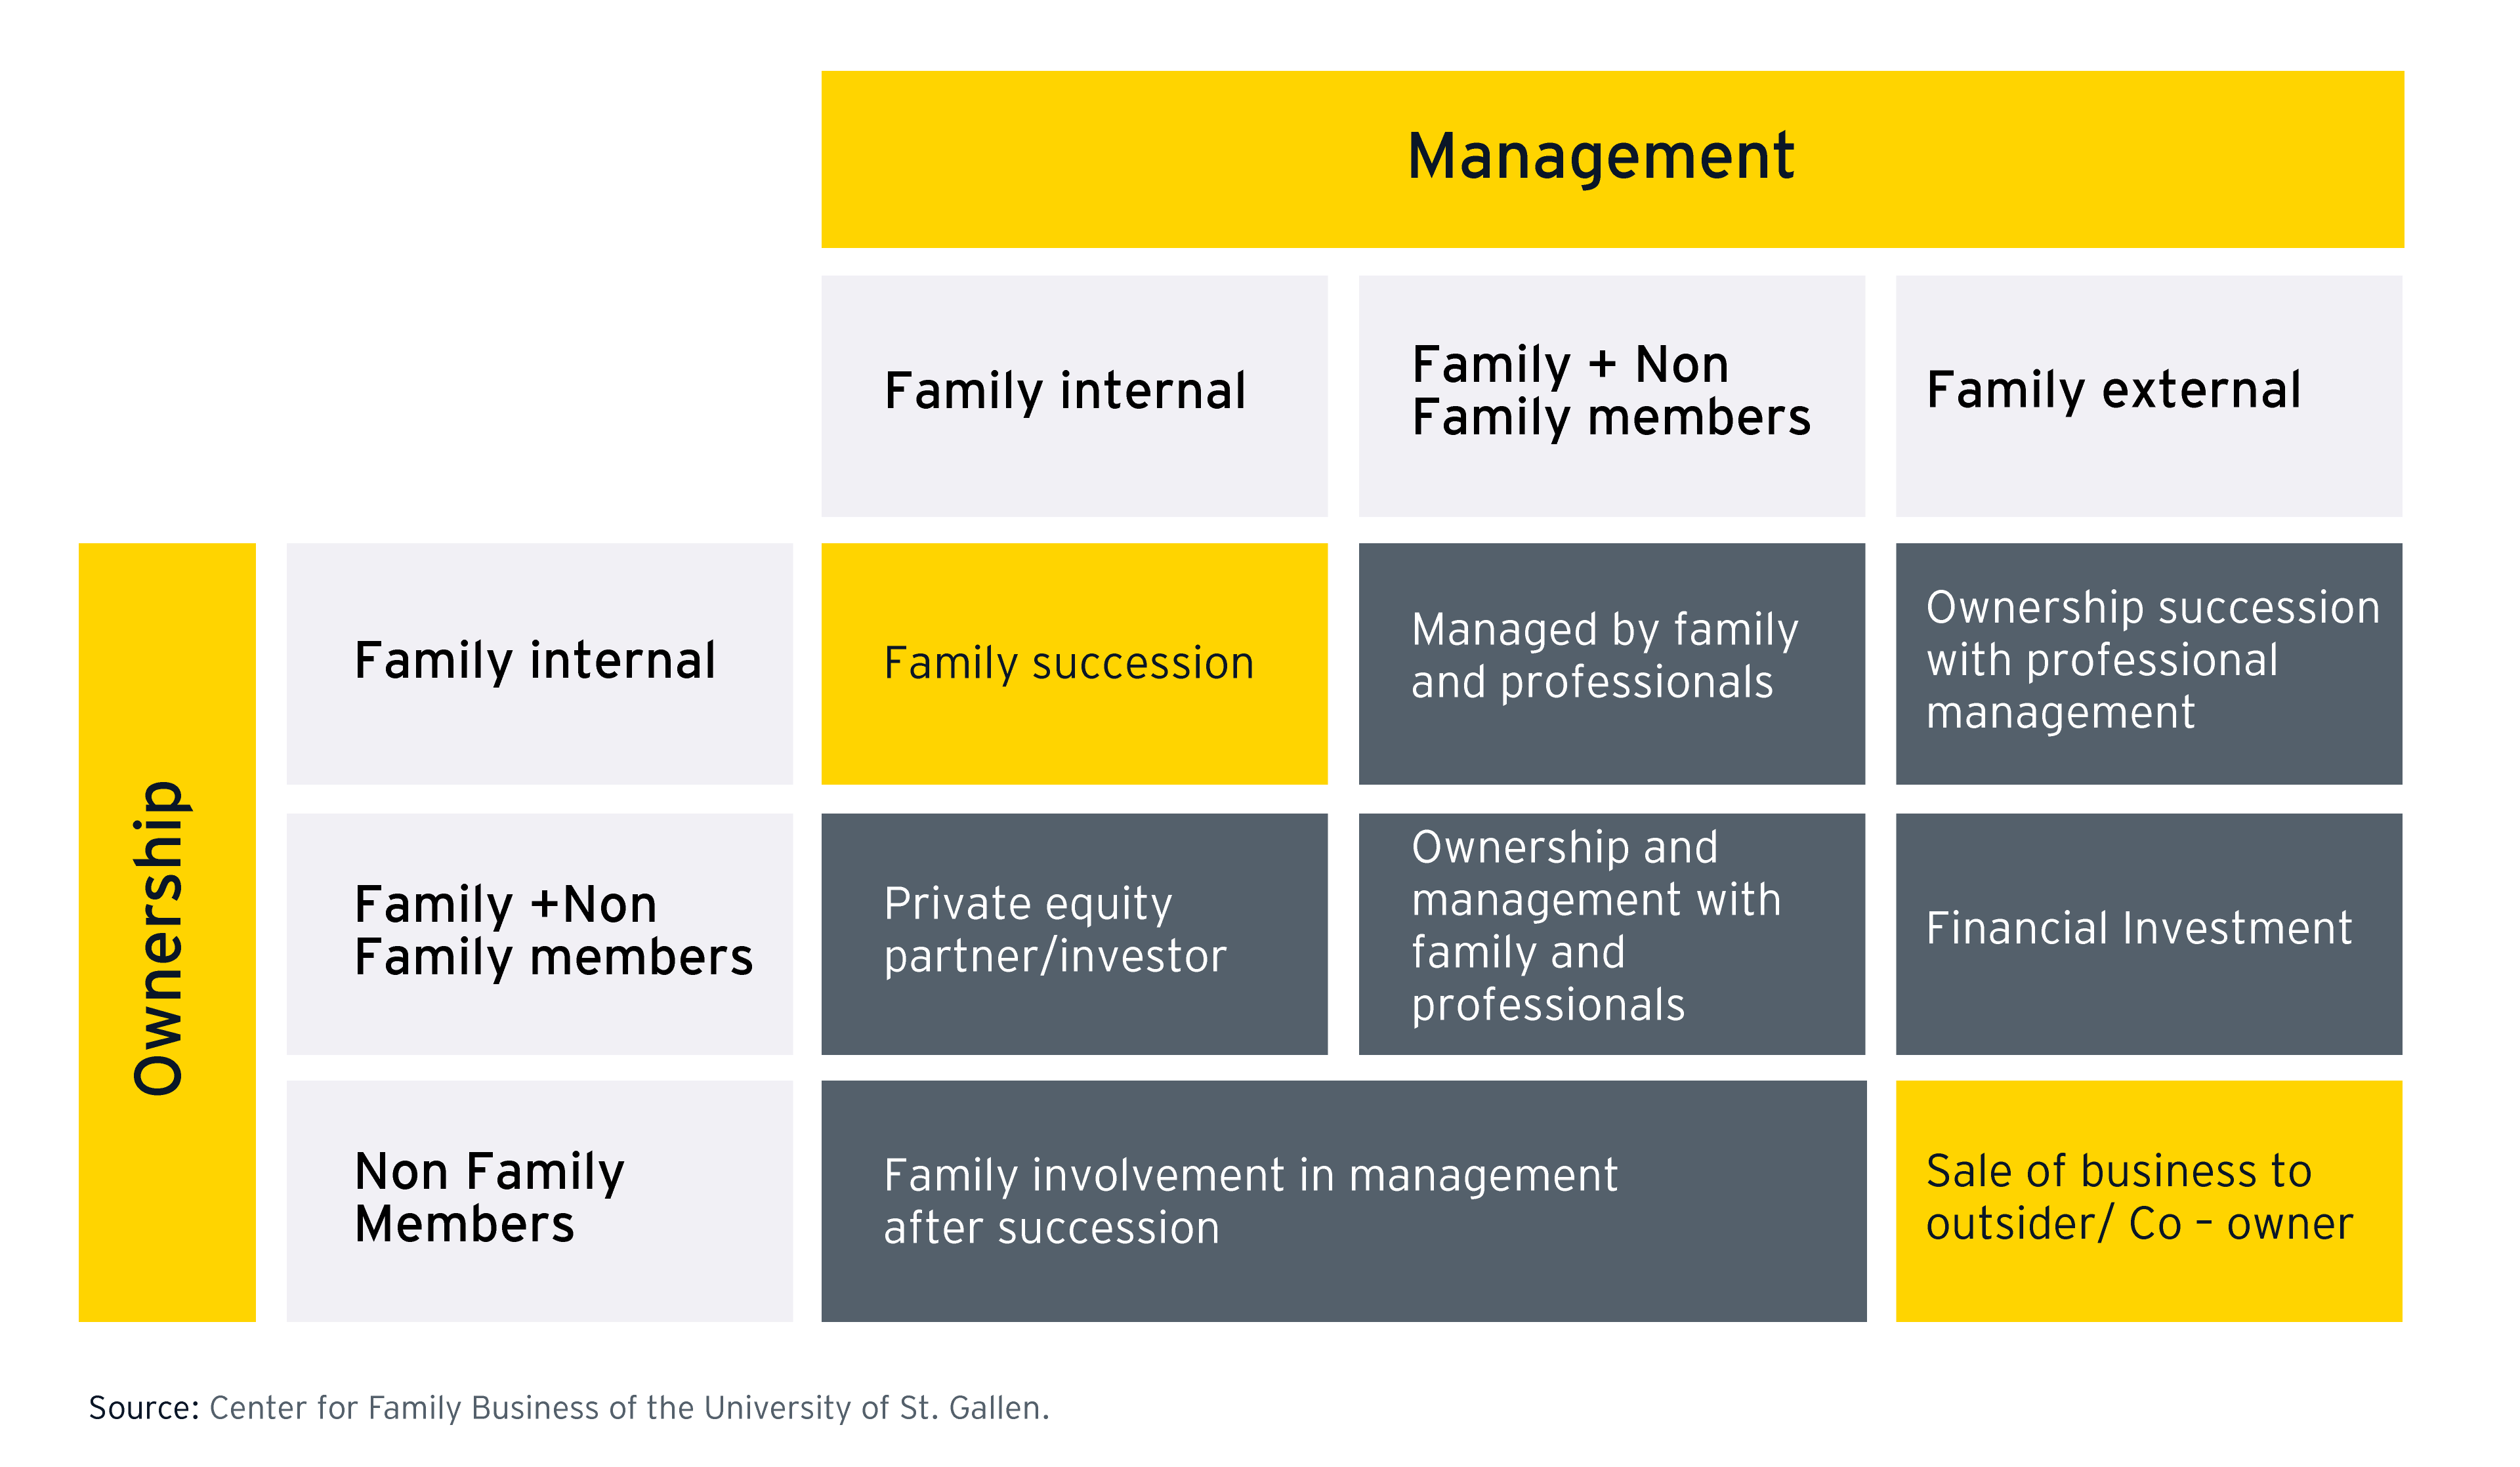 Succession of ownership and management